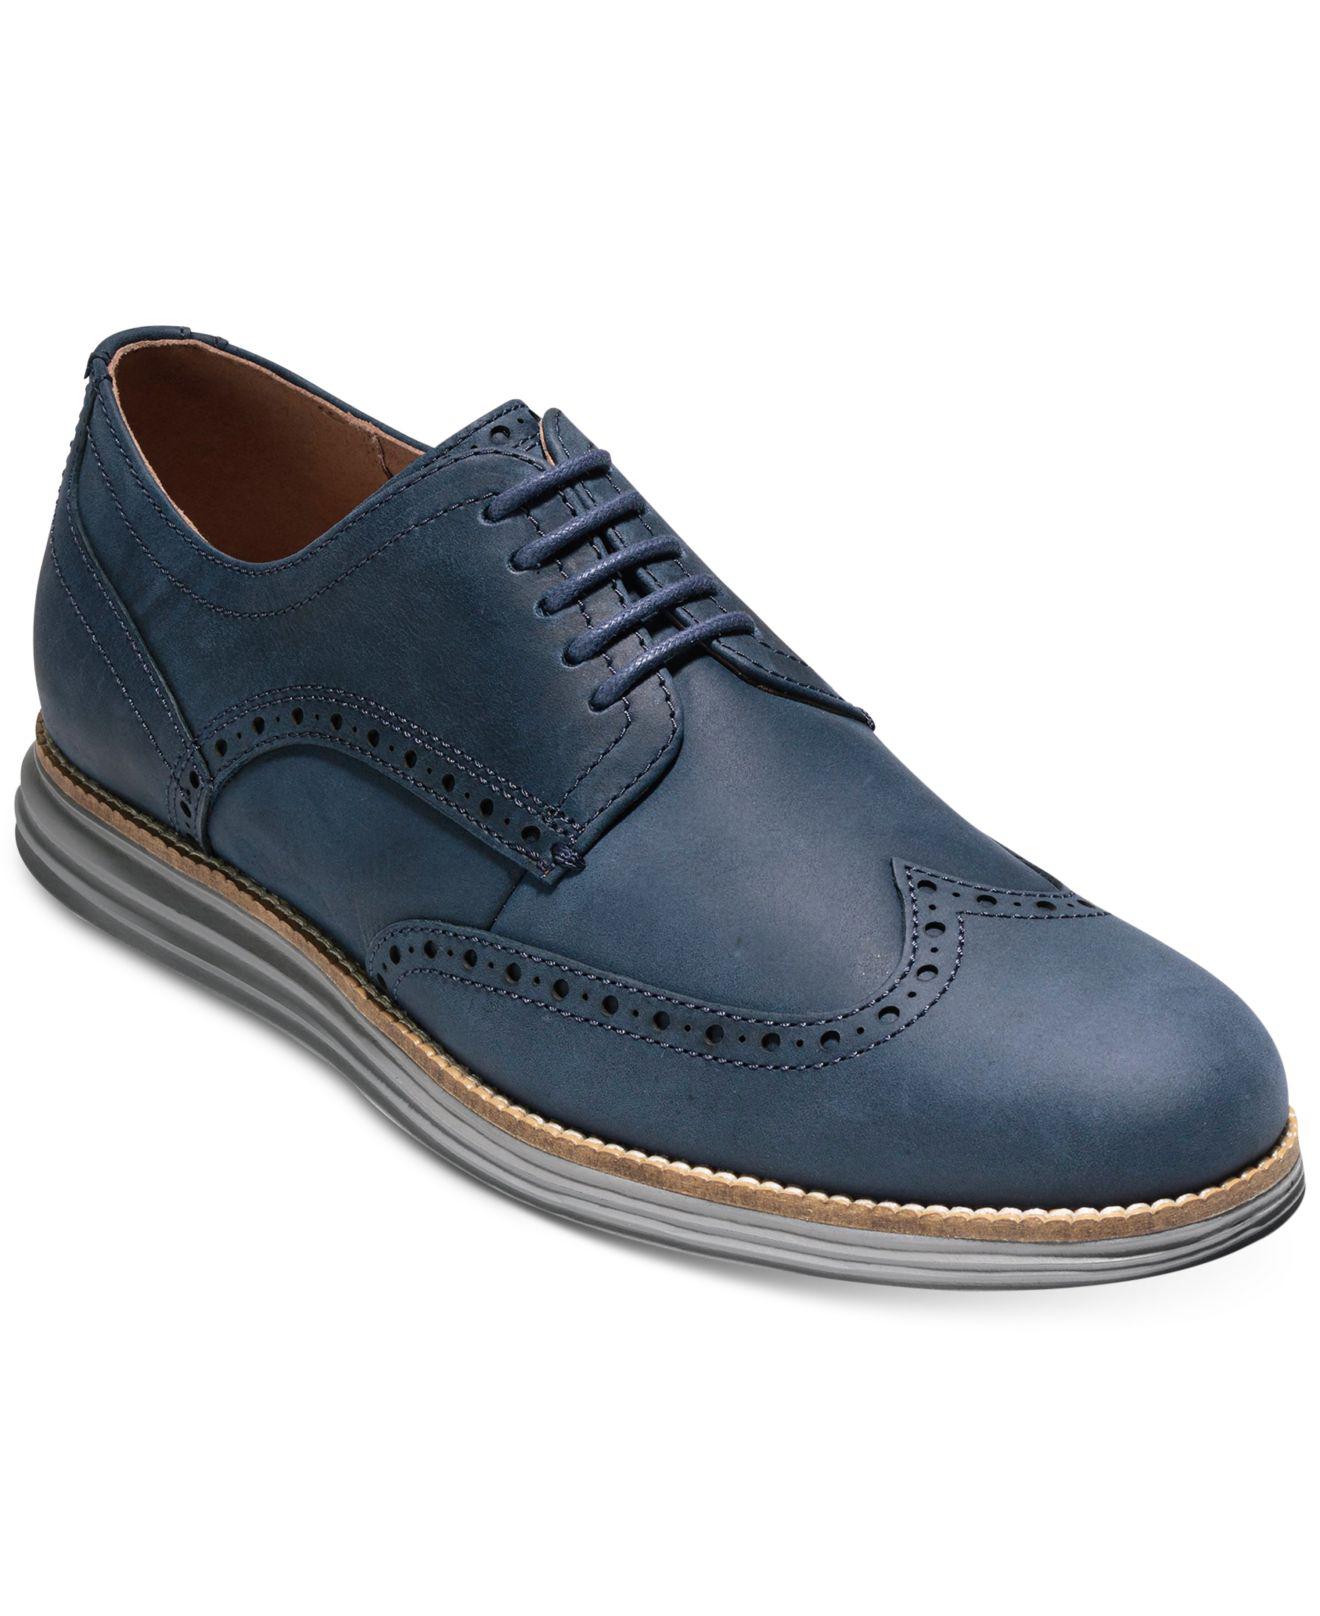 Cole Haan Leather Men's Original Grand Wing Oxfords in Blue for Men - Lyst